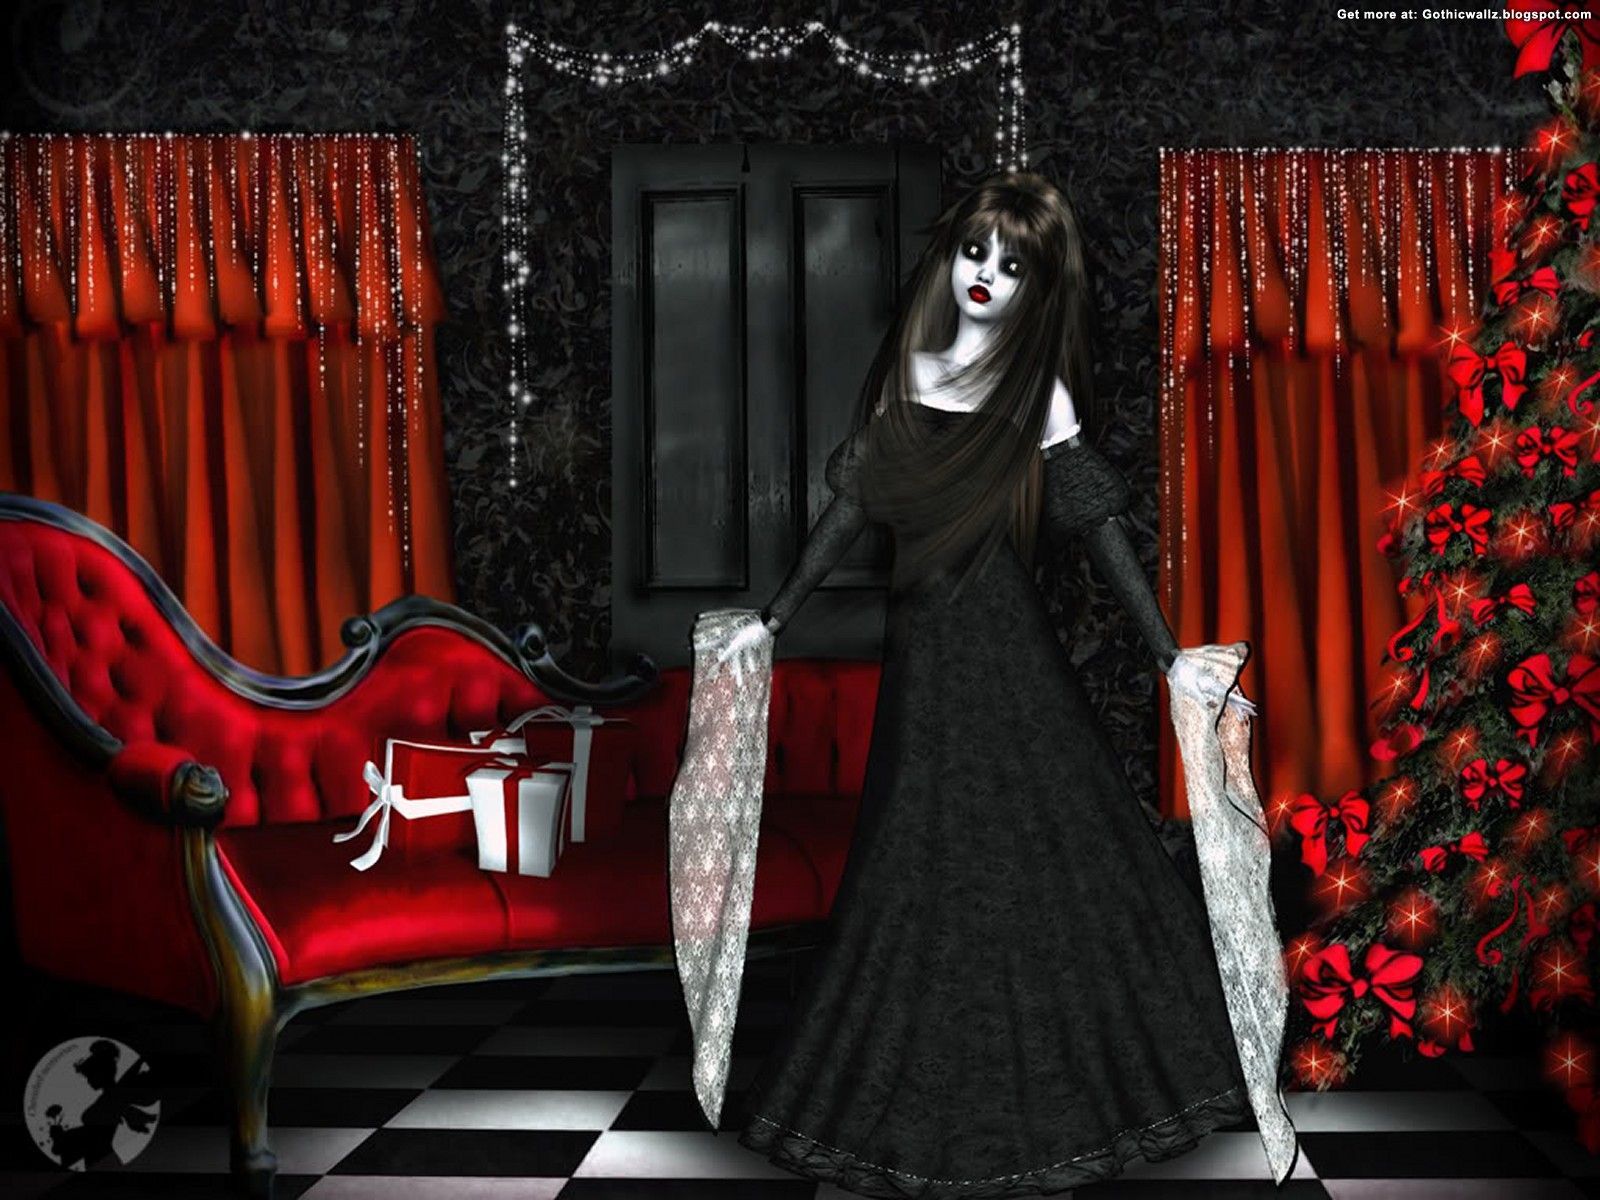 Gothic Christmas 1. Gothic Wallpaper Download. Gothic wallpaper, Dark christmas, Thanksgiving wallpaper